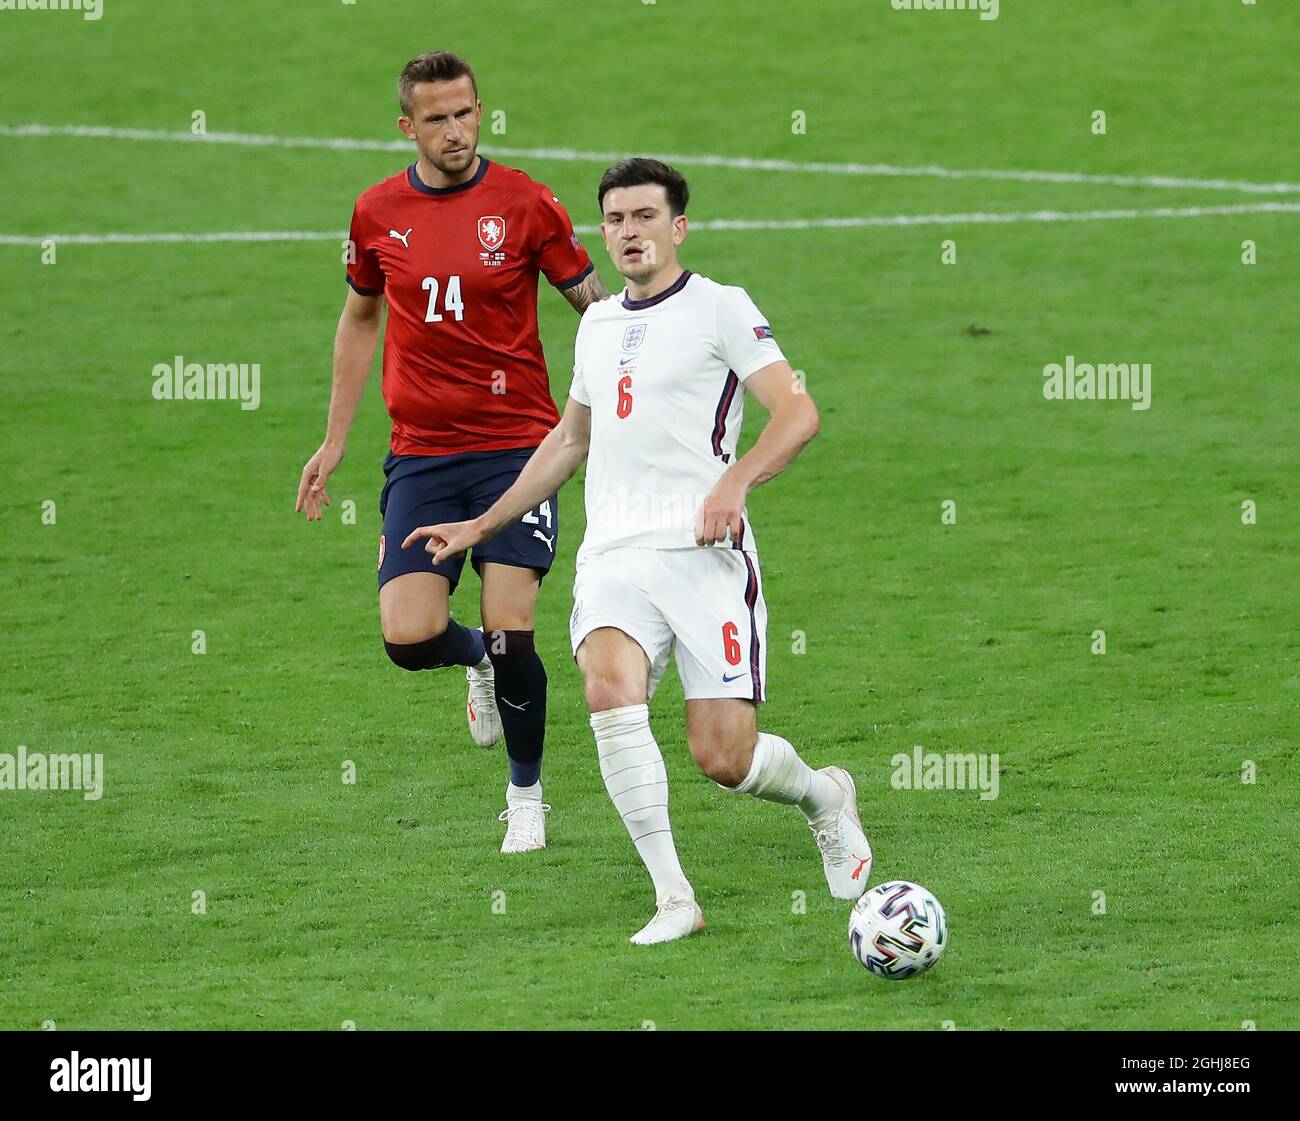 London, England, 22nd June 2021. Harry Maguire of England gets ahead of Tomas Pekhart of Czech Republic during the UEFA European Championships match at Wembley Stadium, London. Picture credit should read: David Klein / Sportimage via PA Images Stock Photo